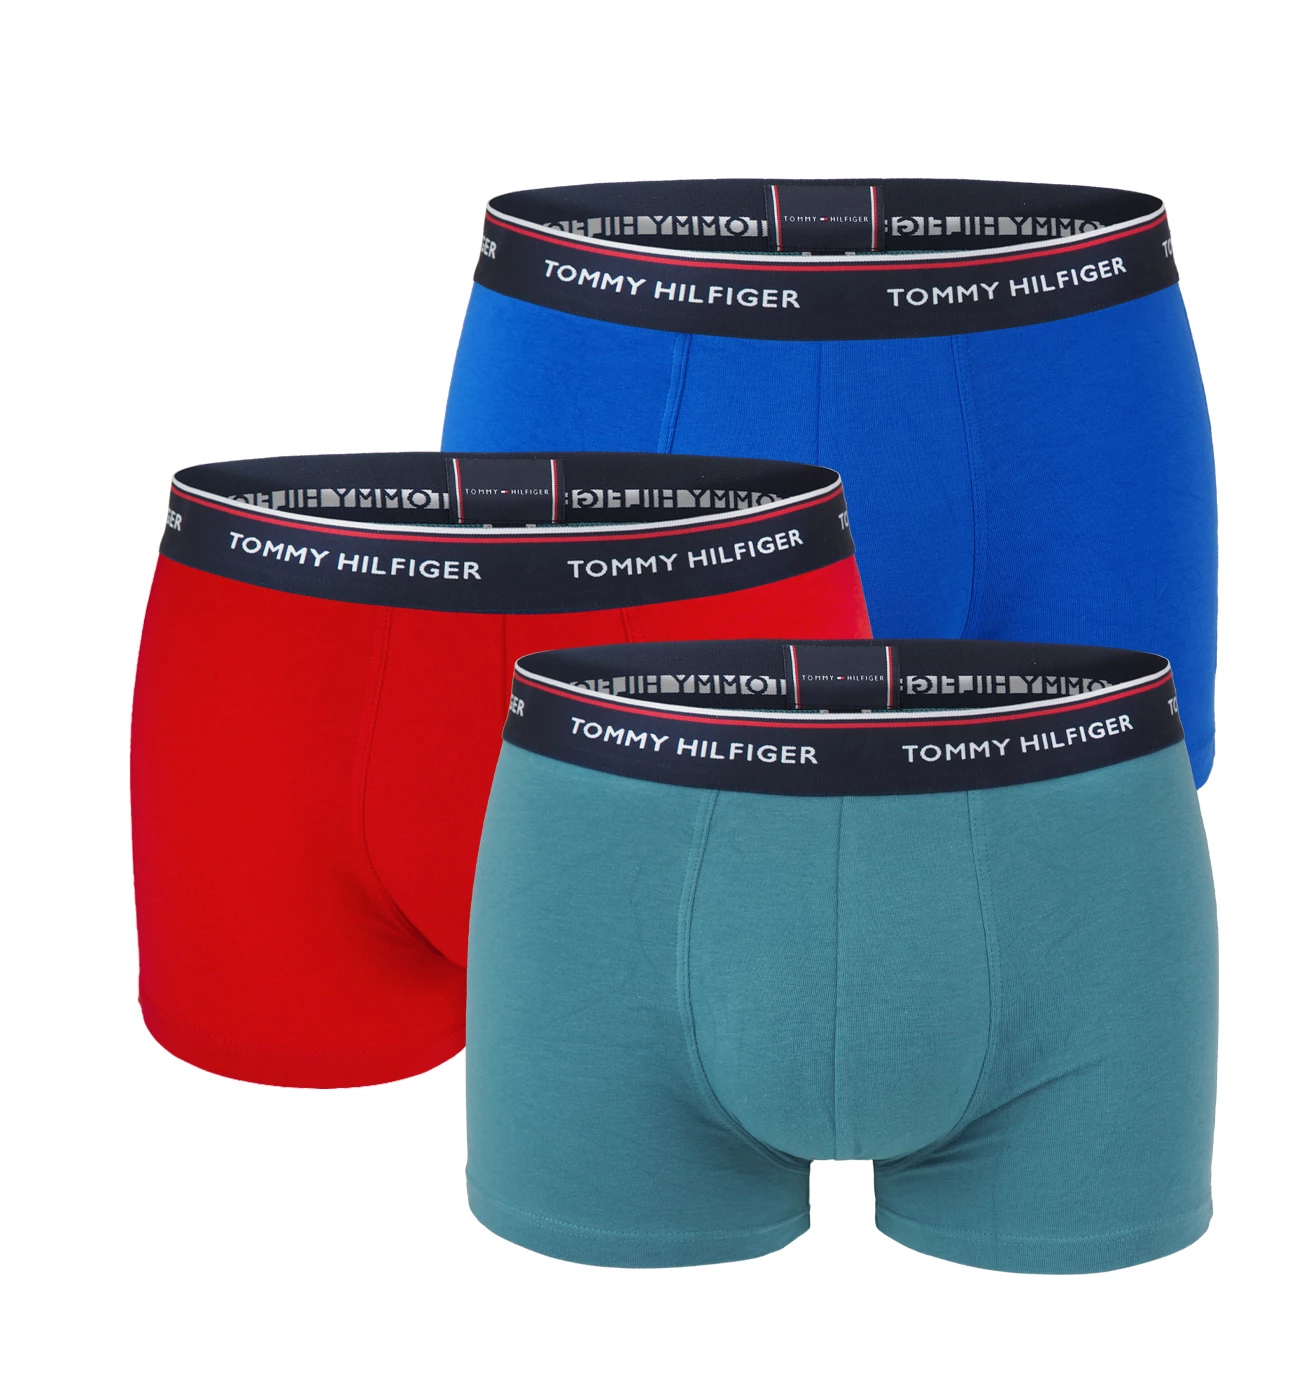 TOMMY HILFIGER - boxerky 3PACK premium essentials electric blue & red combo